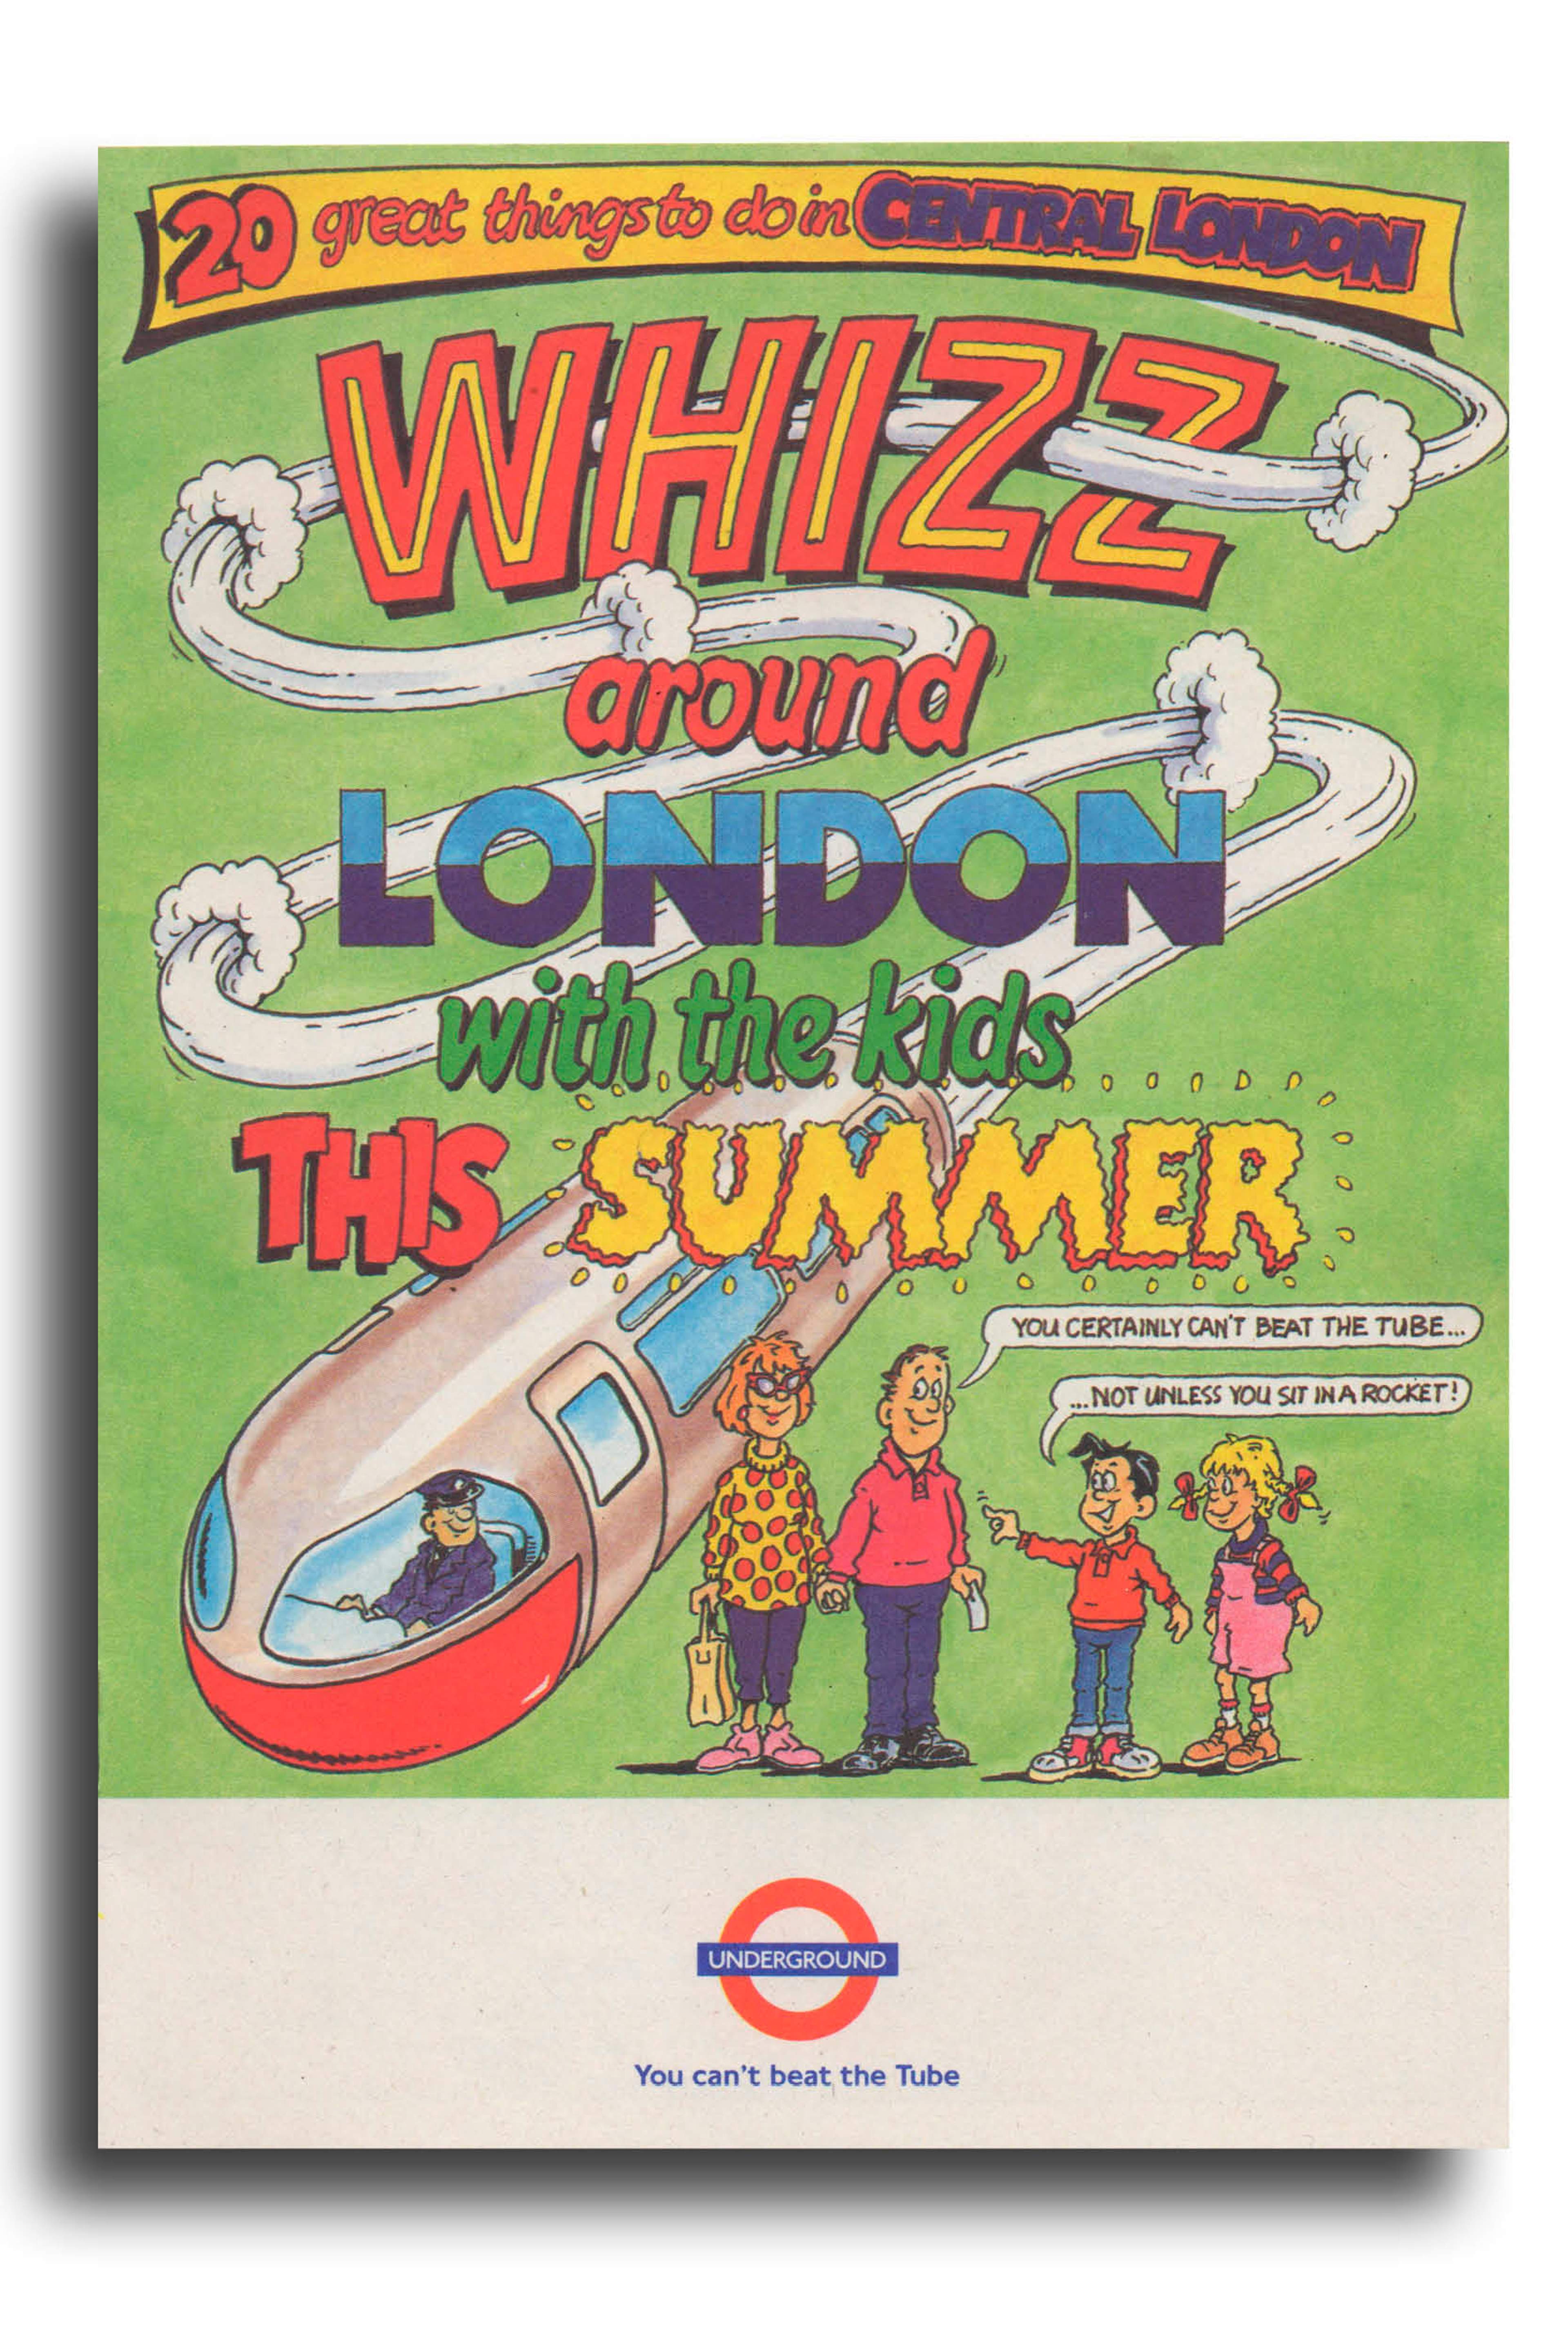 London Underground leaflet in a comic style selling the One Day Family Travelcard.